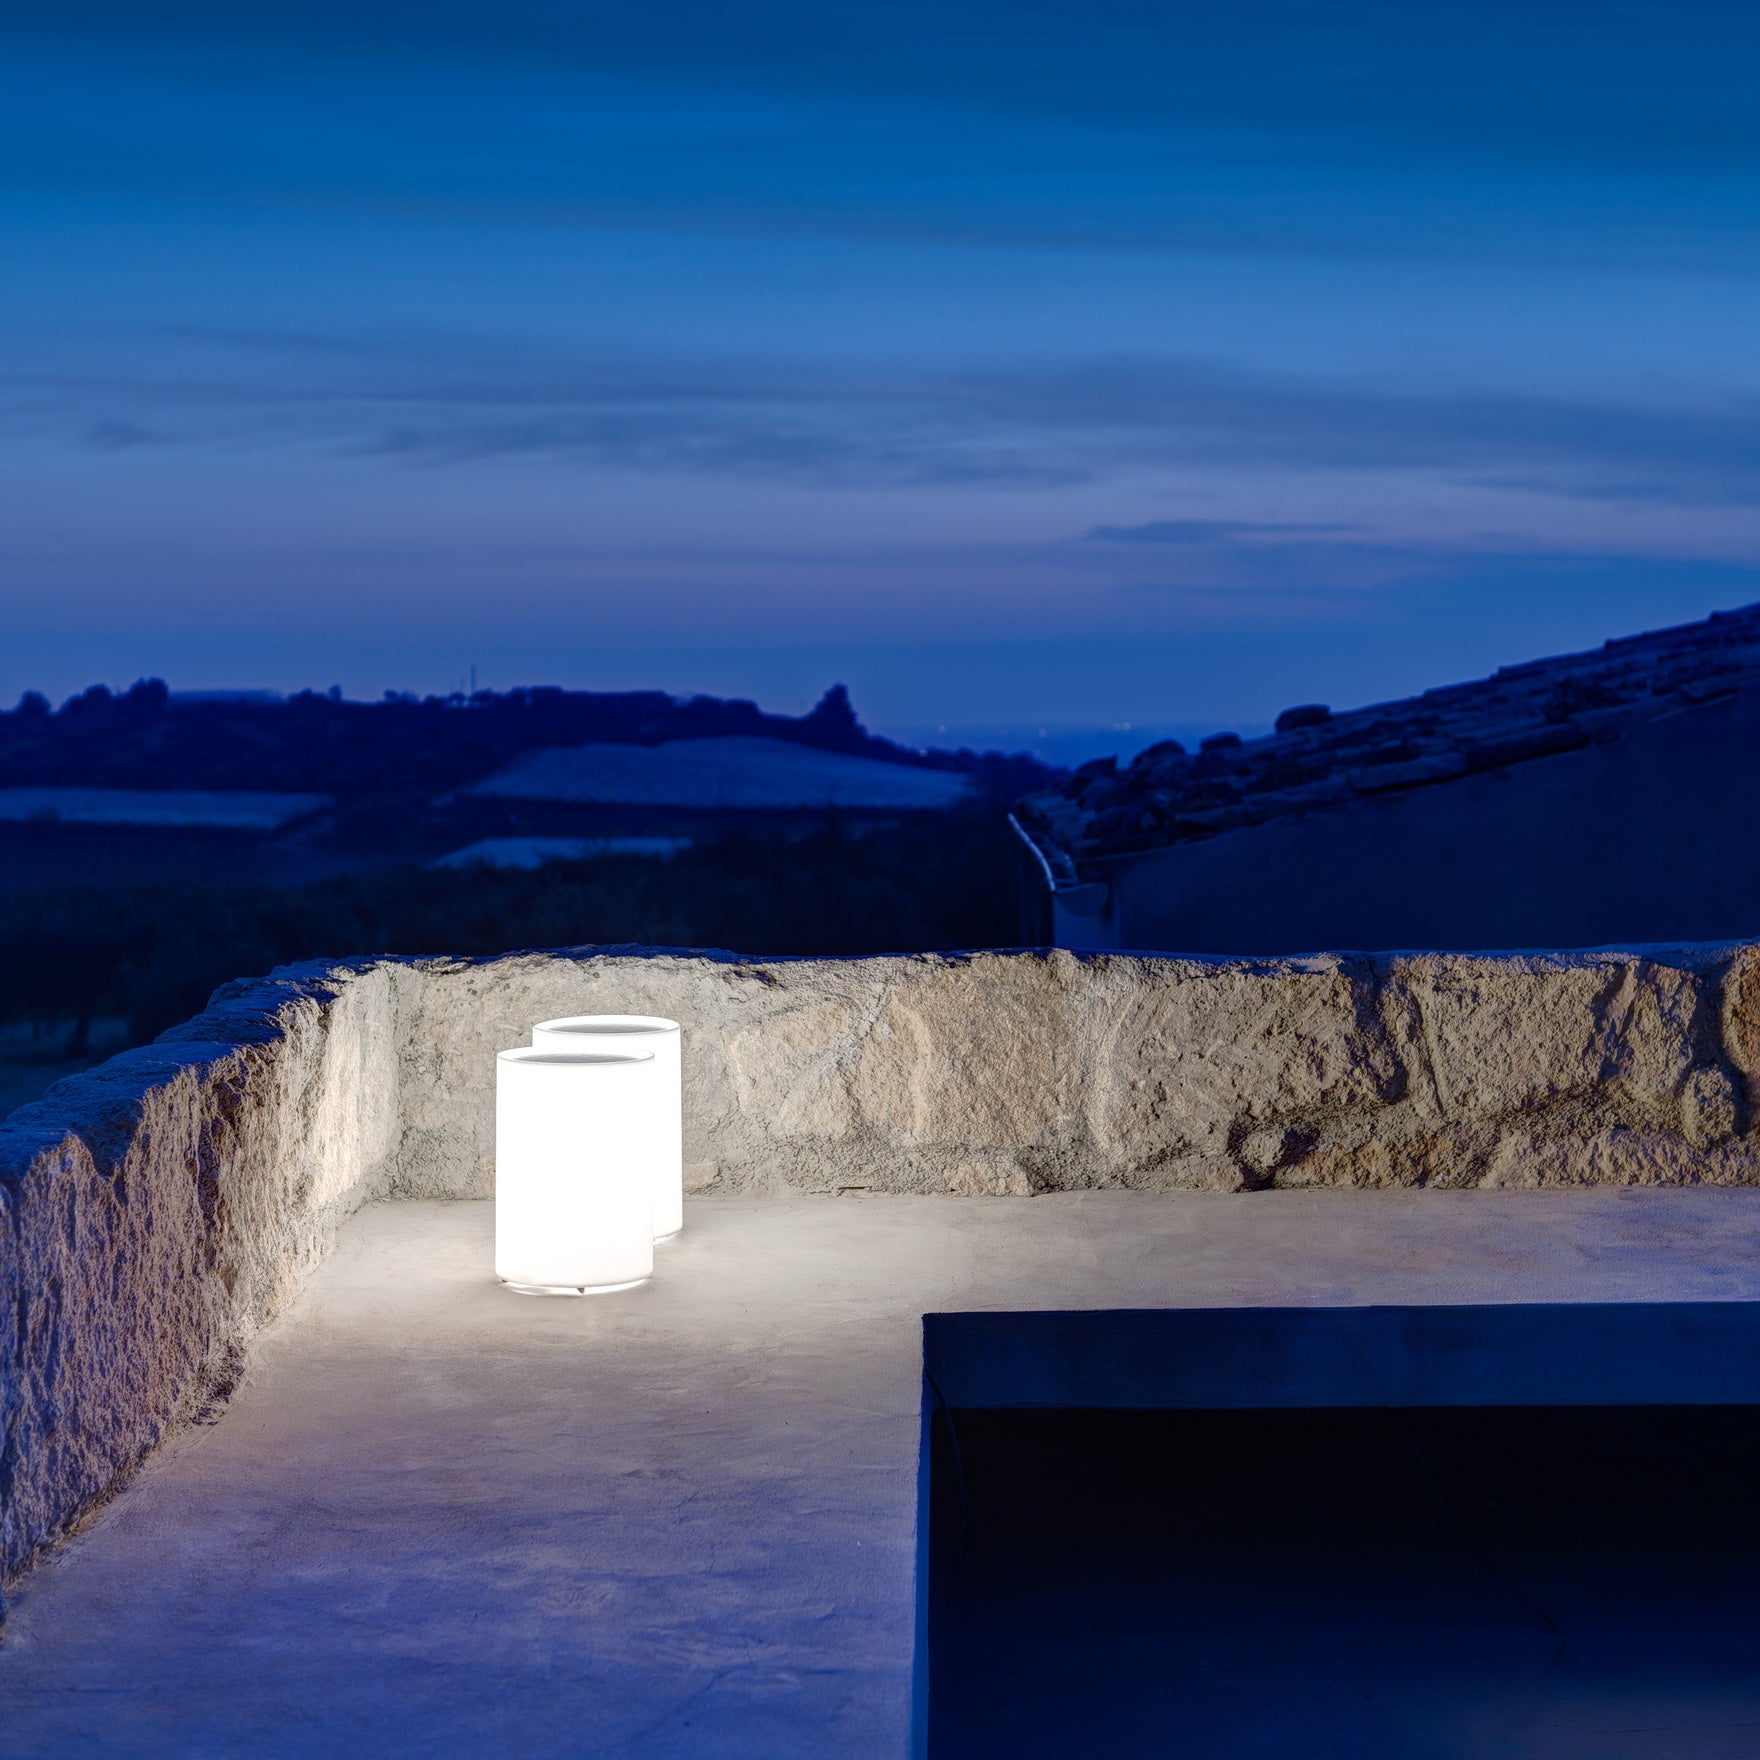 Lenta outdoor lights against stone wall with landscape view